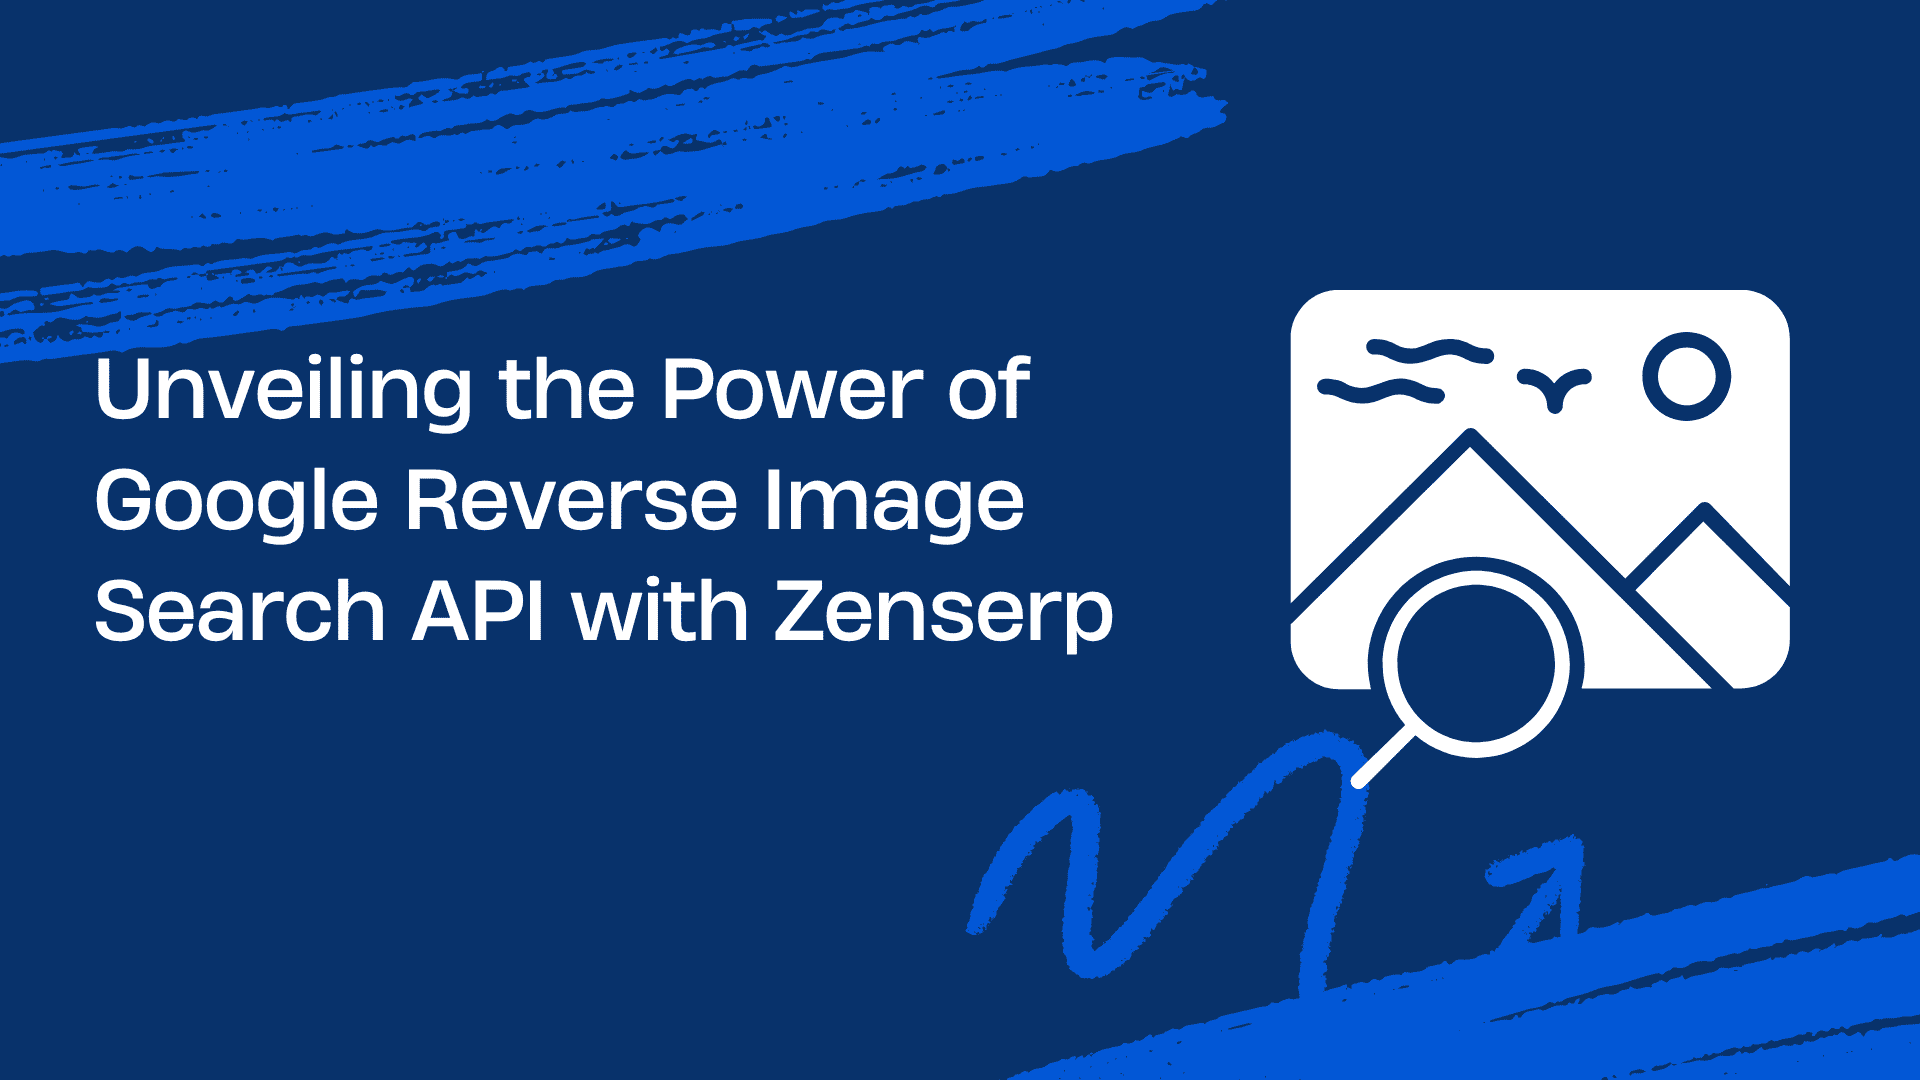 Unveiling the Power of Google Reverse Image Search API with Zenserp - zenserp